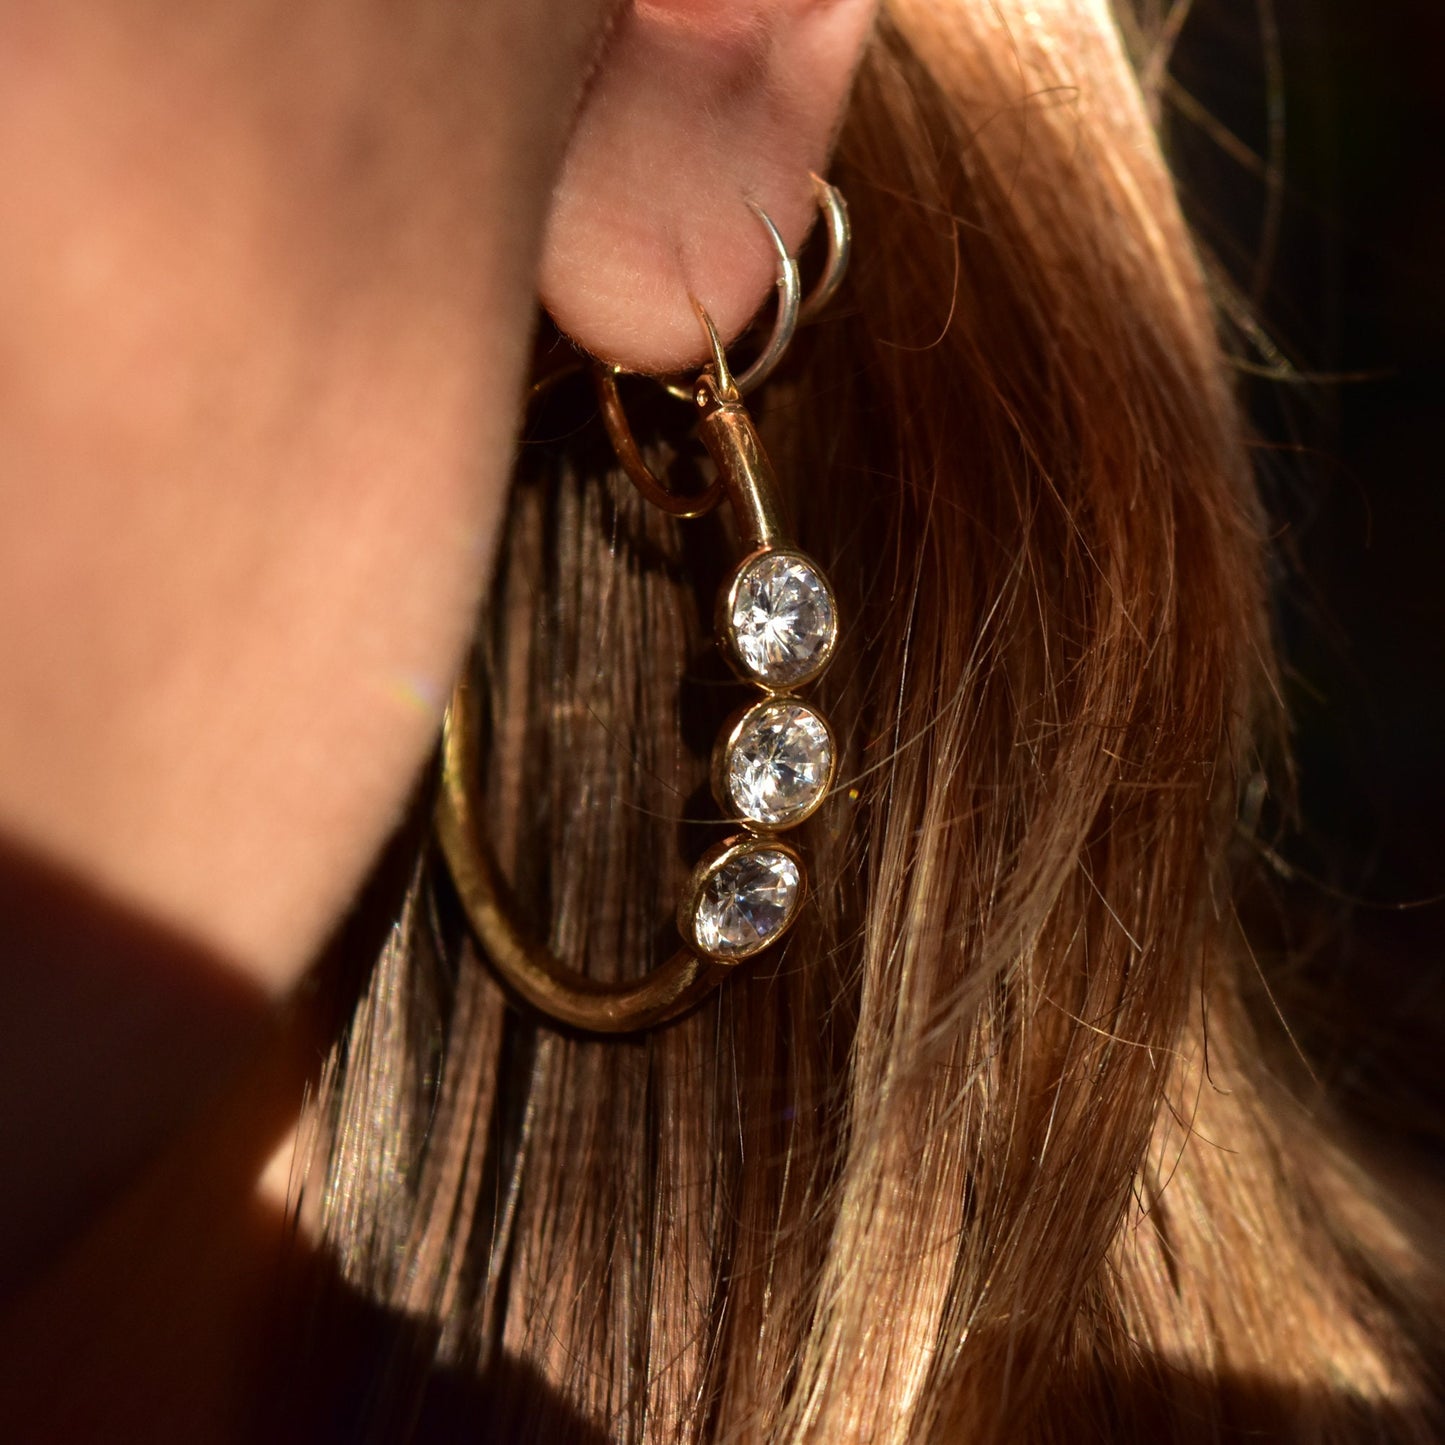 14K yellow gold three-stone cubic zirconia hoop earrings hanging from a woman's ear, with long blonde hair visible